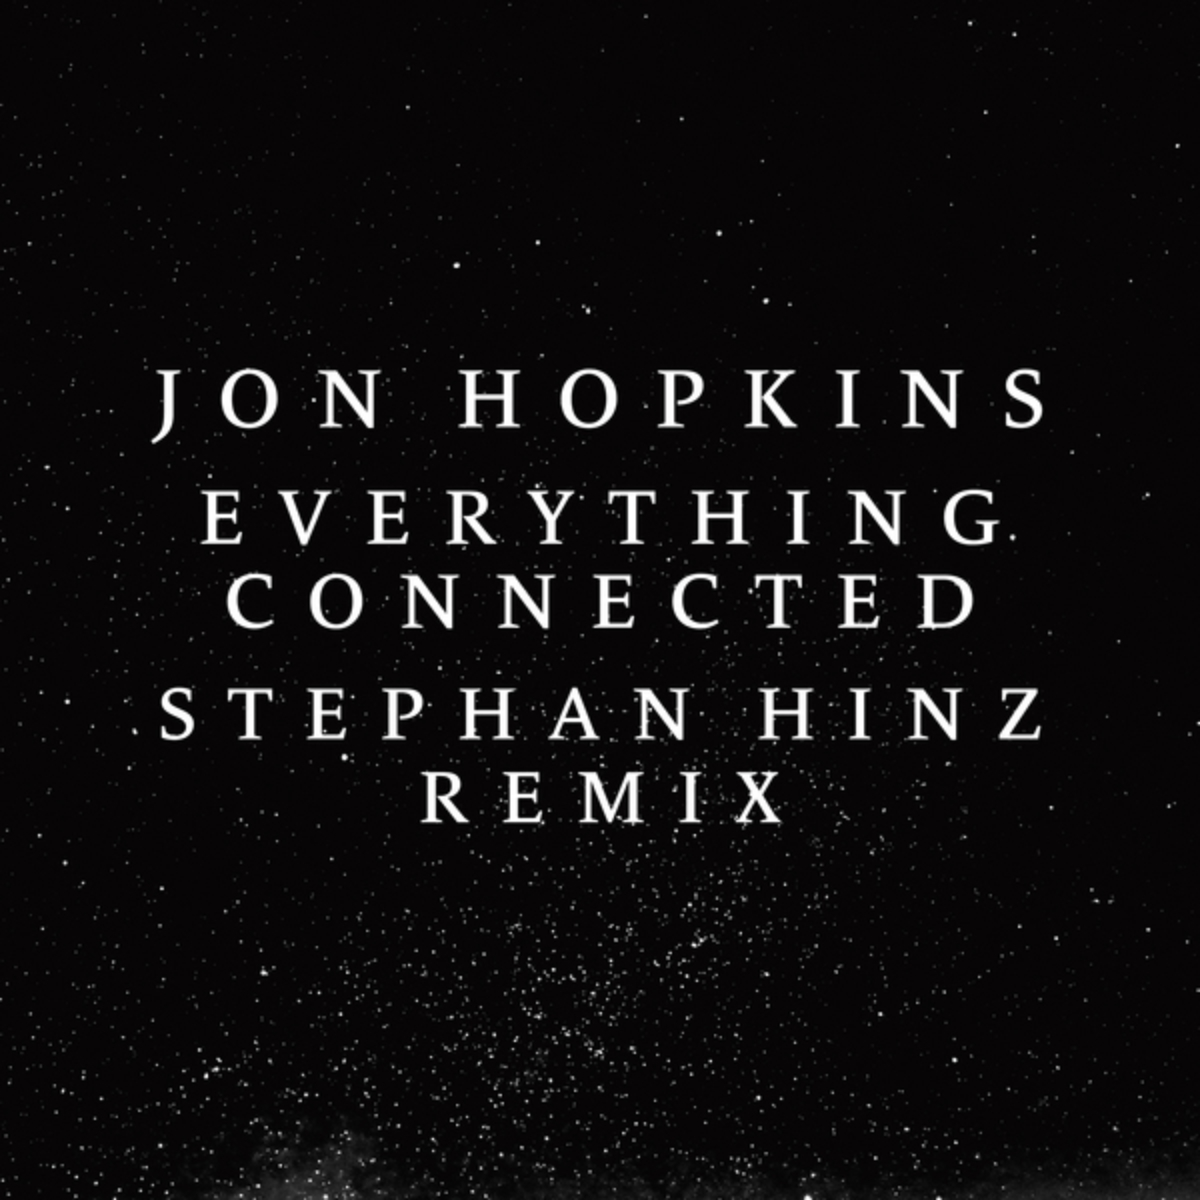 Stephan Hinz remixes "Everything Connected"